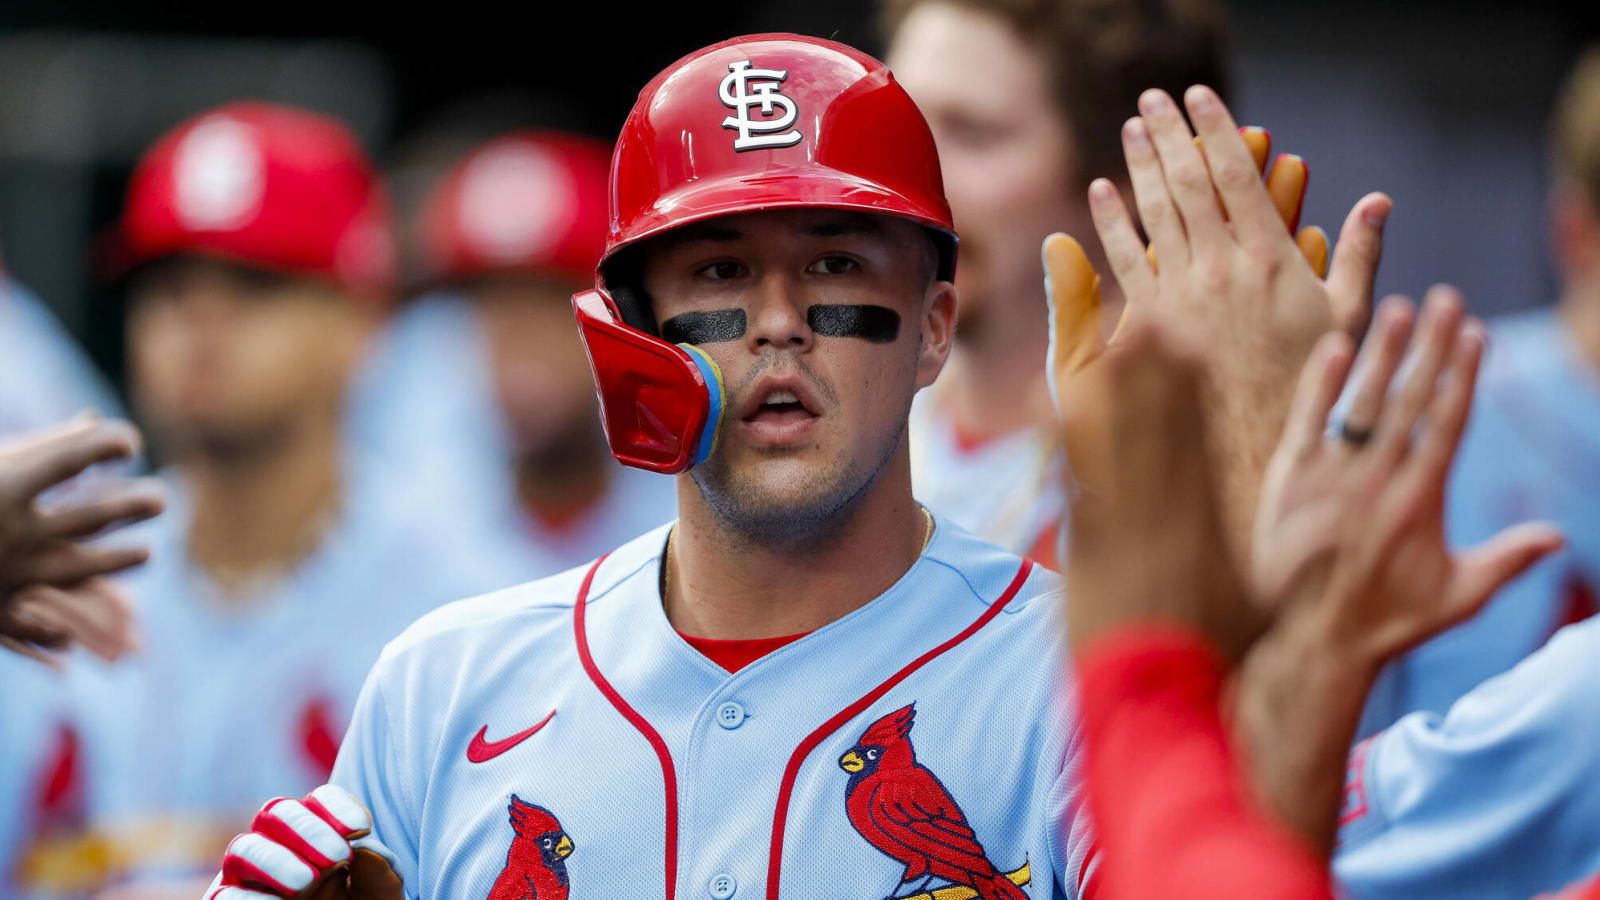 Cardinals outfielder diagnosed with rib fractures